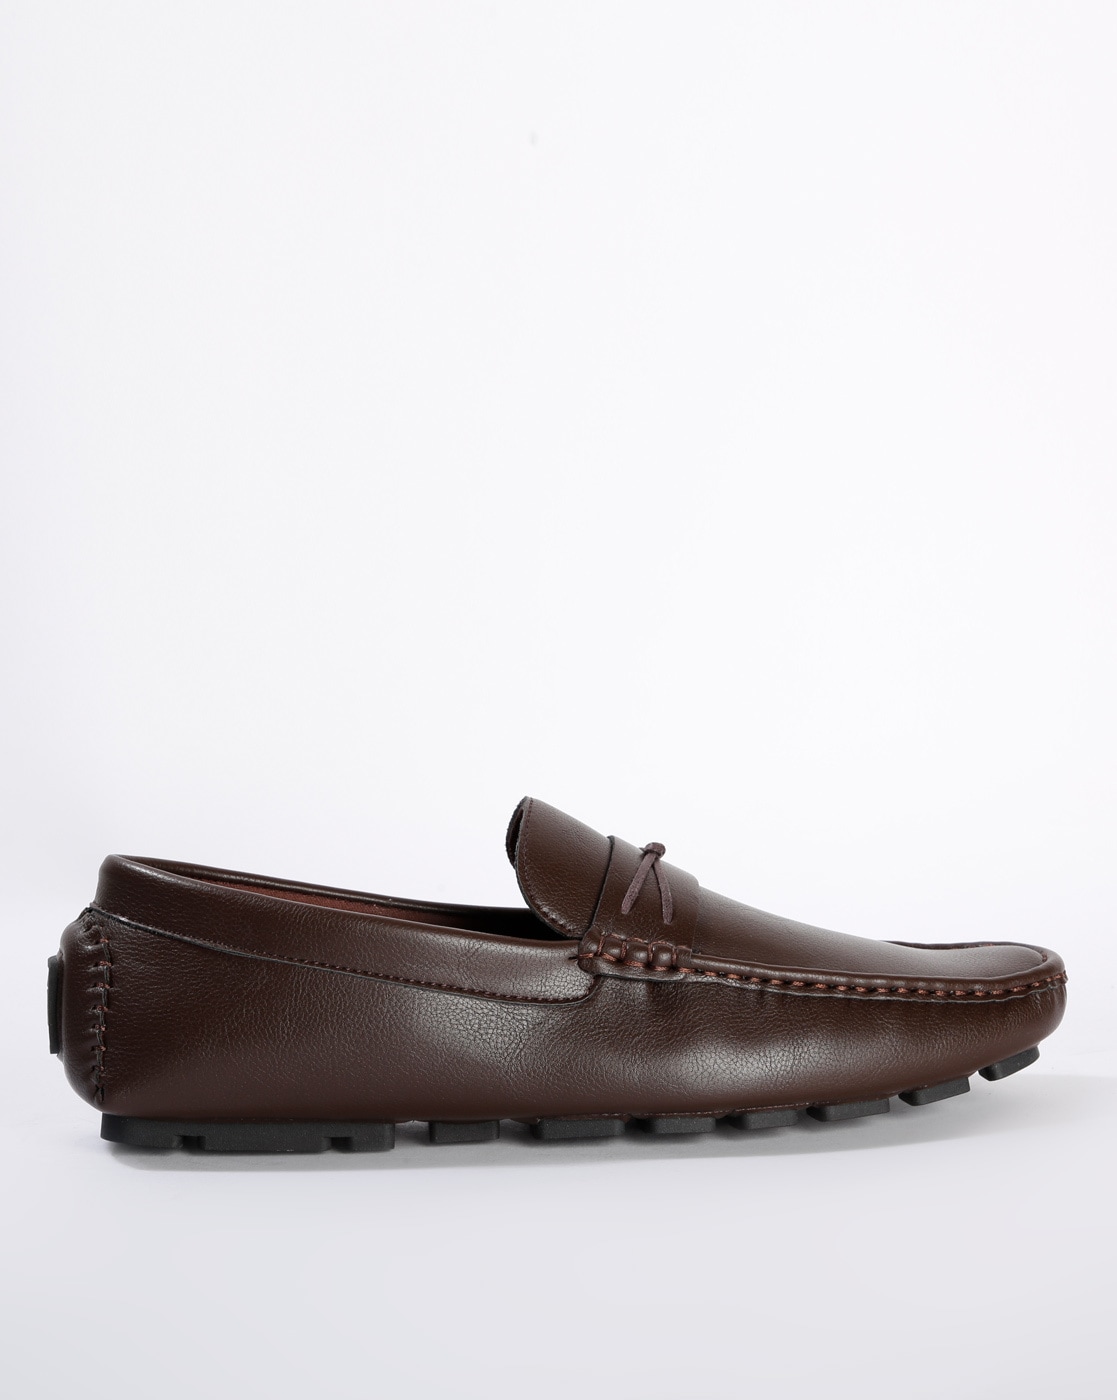 ajio online shopping for mens shoes